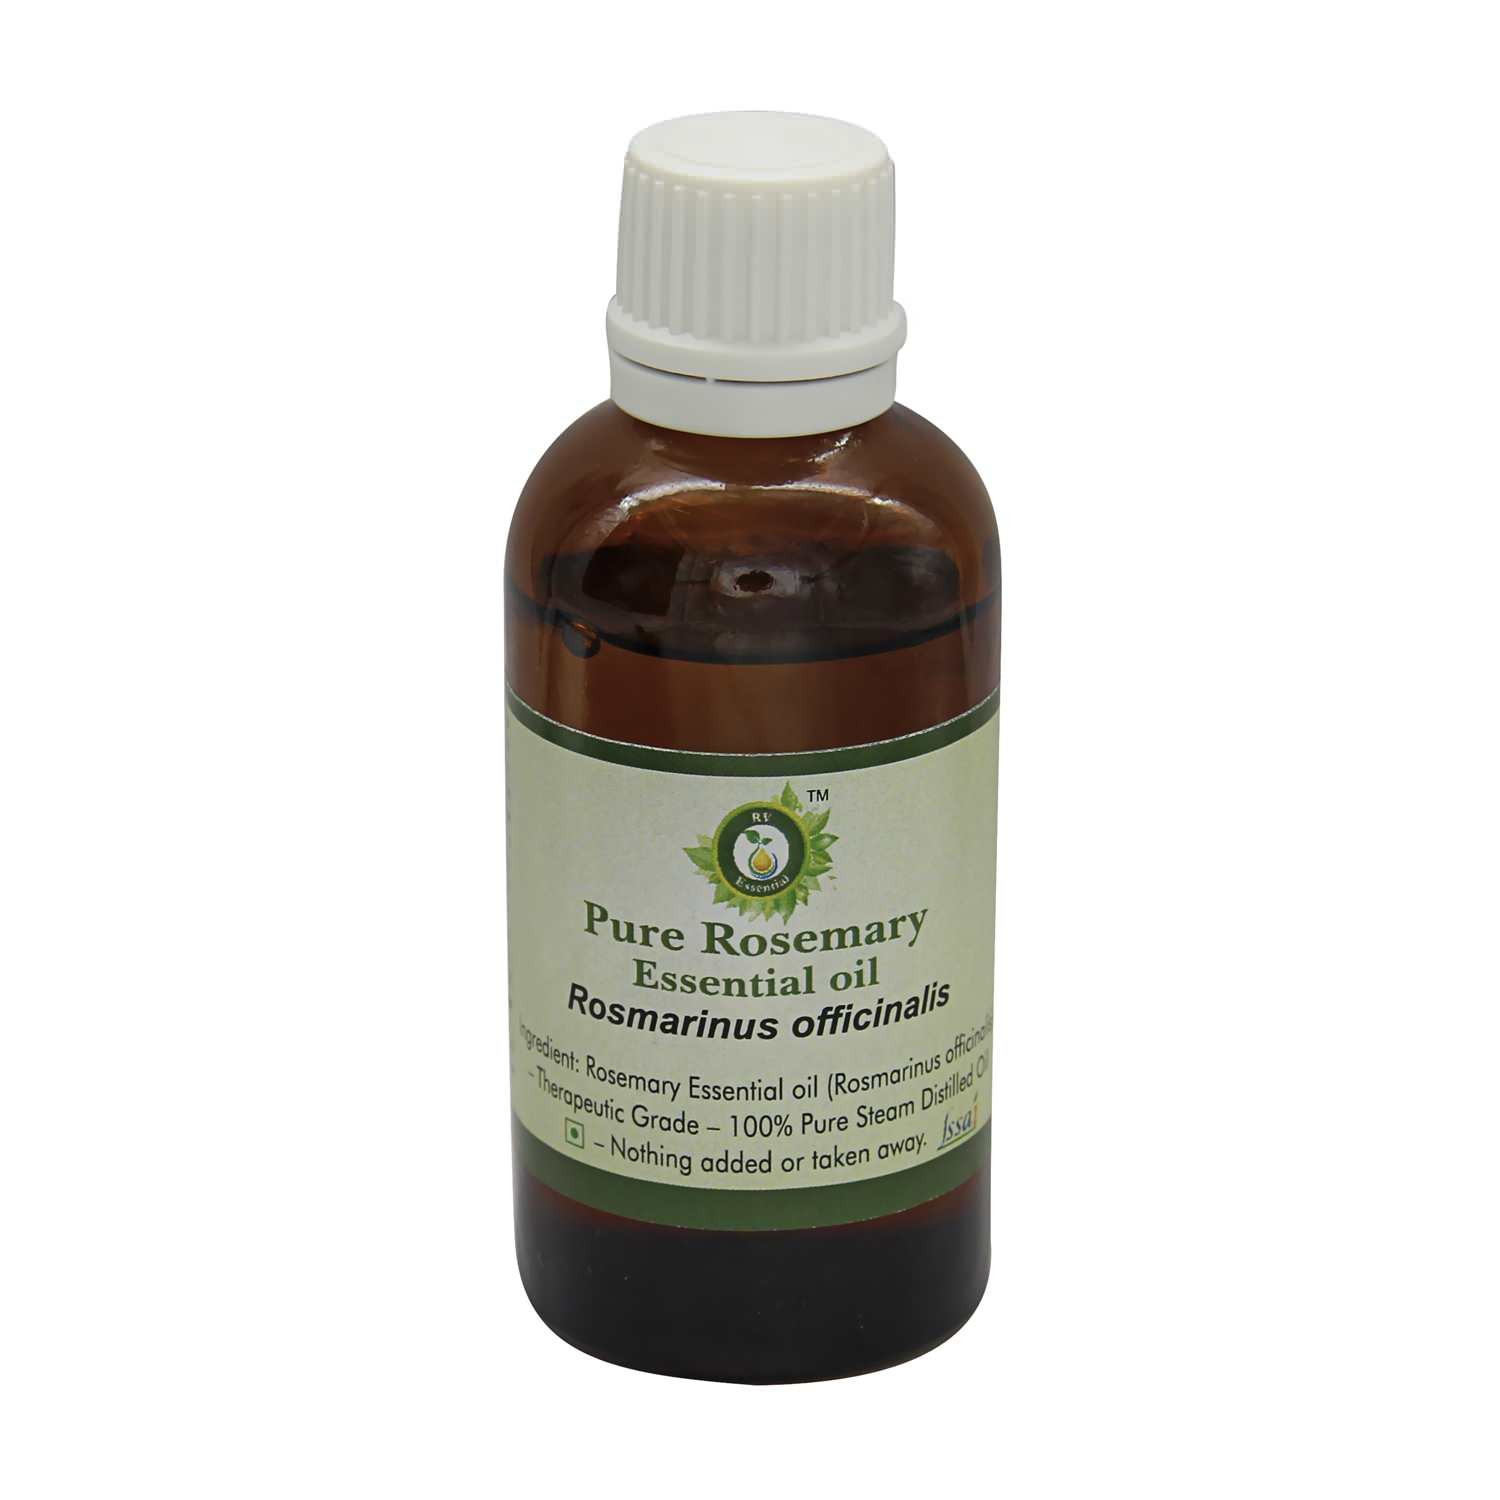 R V Essential Pure Rosemary Essential Oil 15ml (0.507oz)- Rosmarinus Officinalis (100% Pure and Natural Therapeutic Grade)